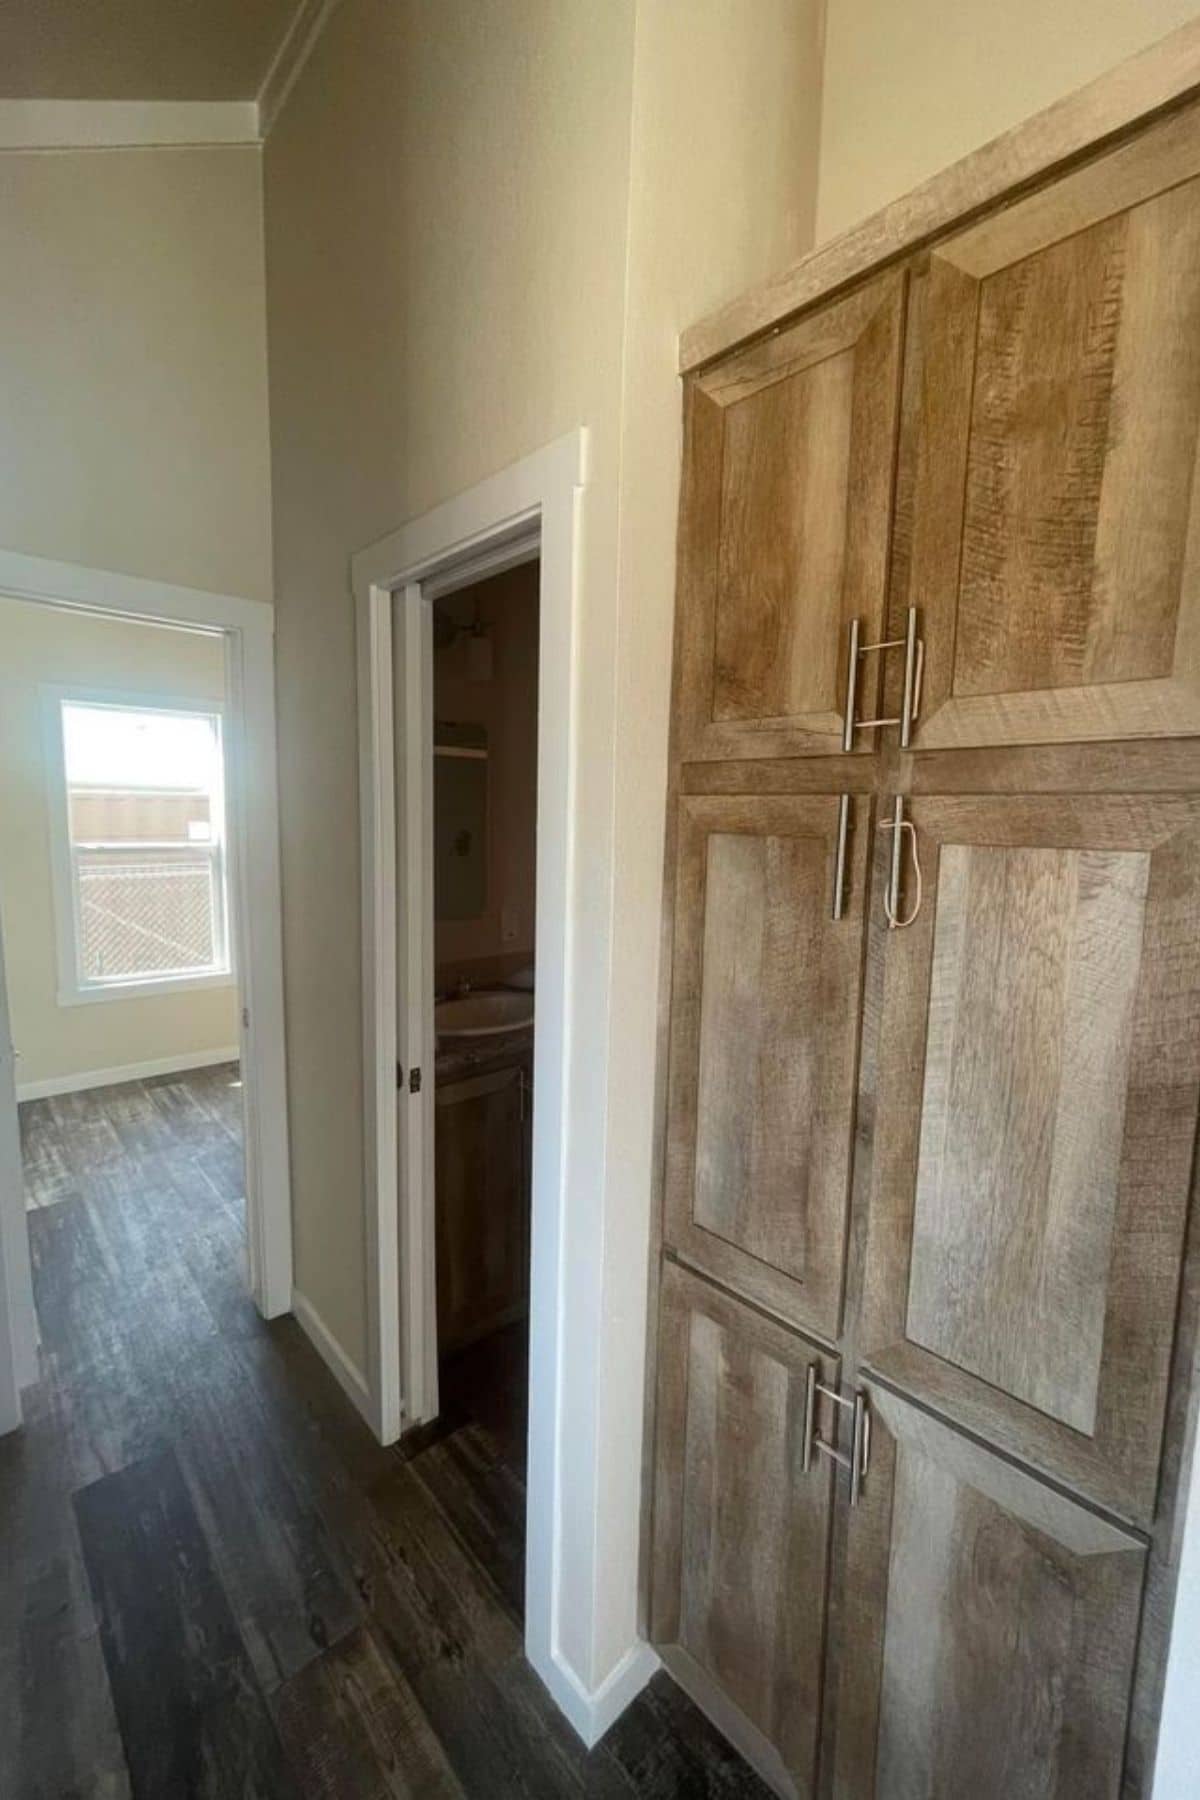 wooden doors against wall next to the bathroom door of tiny home with cream walls